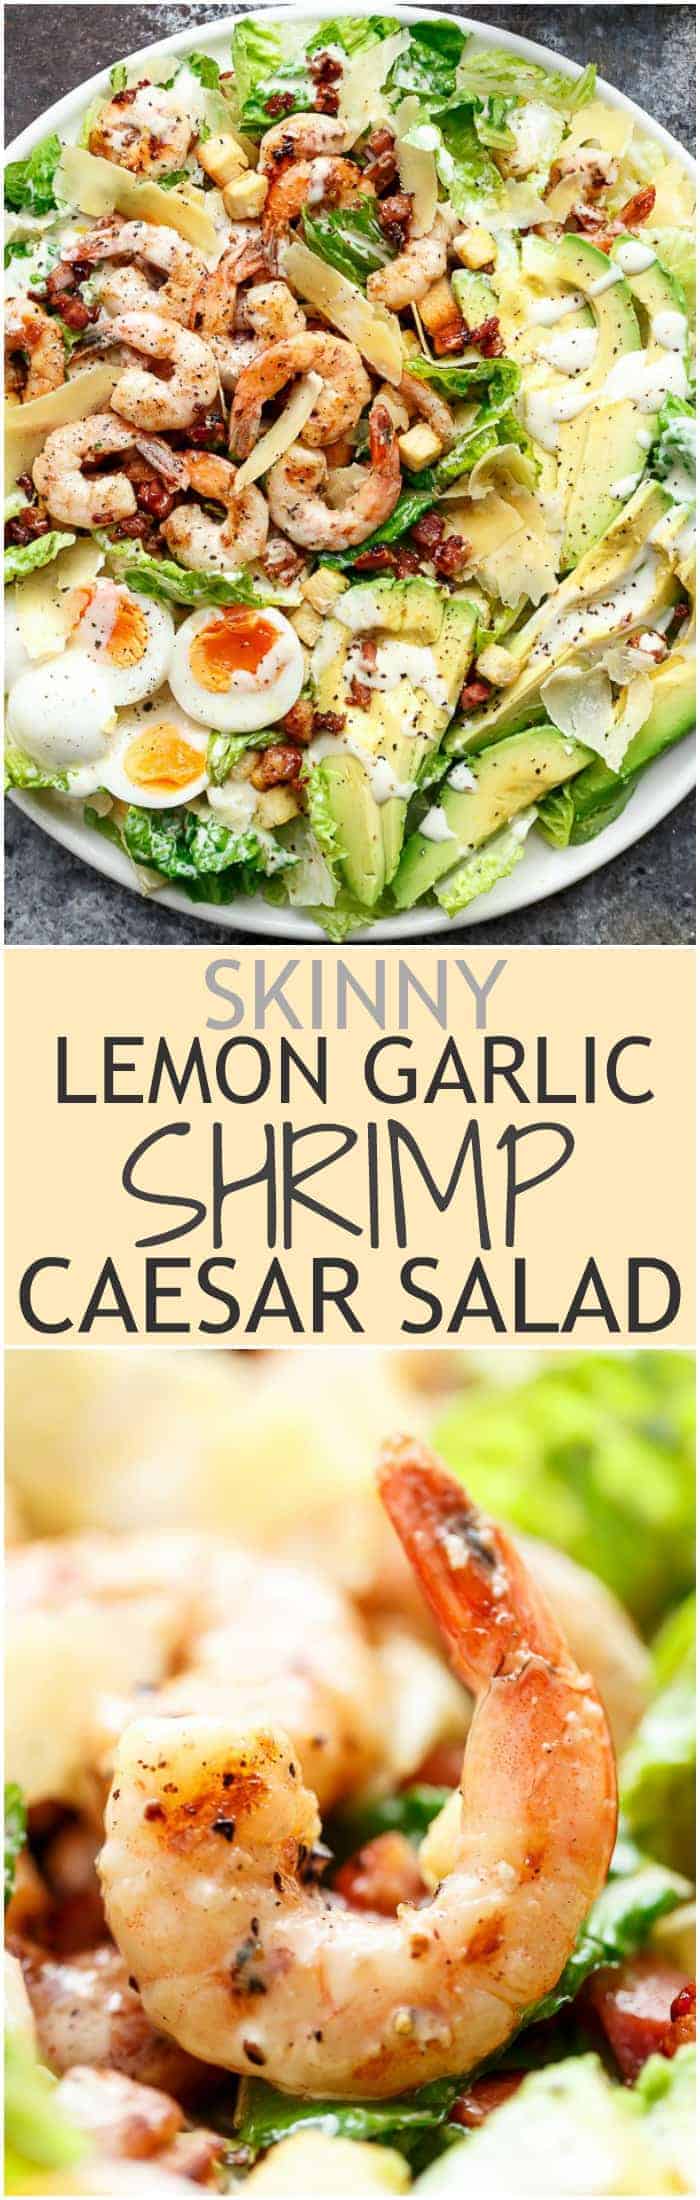 Grilled and Skinny Lemon Garlic Shrimp Caesar Salad with a lightened up creamy Caesar dressing is a complete meal in a salad and a family favourite! | https://cafedelites.com